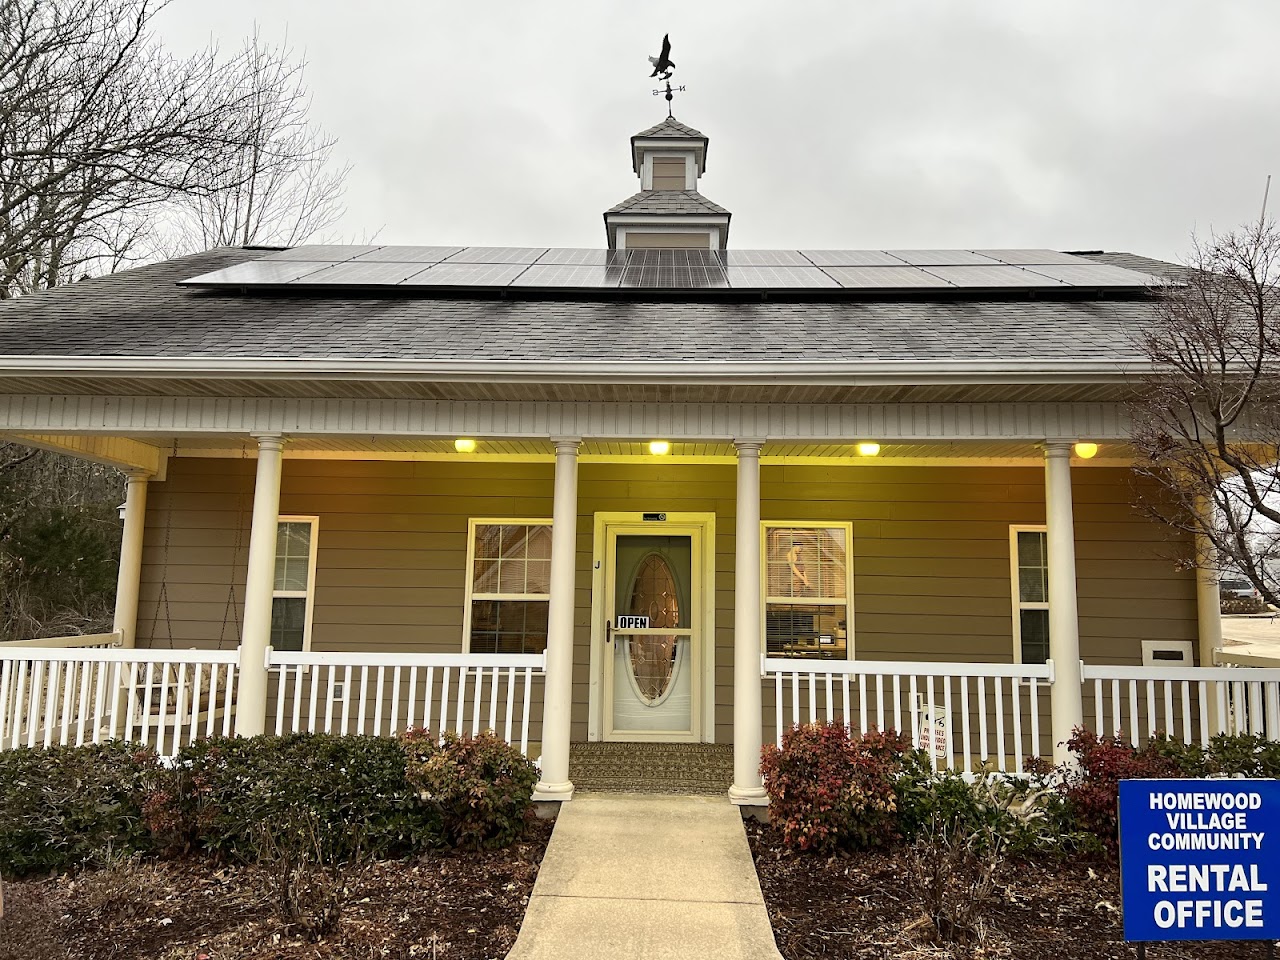 Photo of HOMEWOOD VILLAGE SENIOR CITIZENS. Affordable housing located at 321 HOMEWOOD LN ASH FLAT, AR 72513